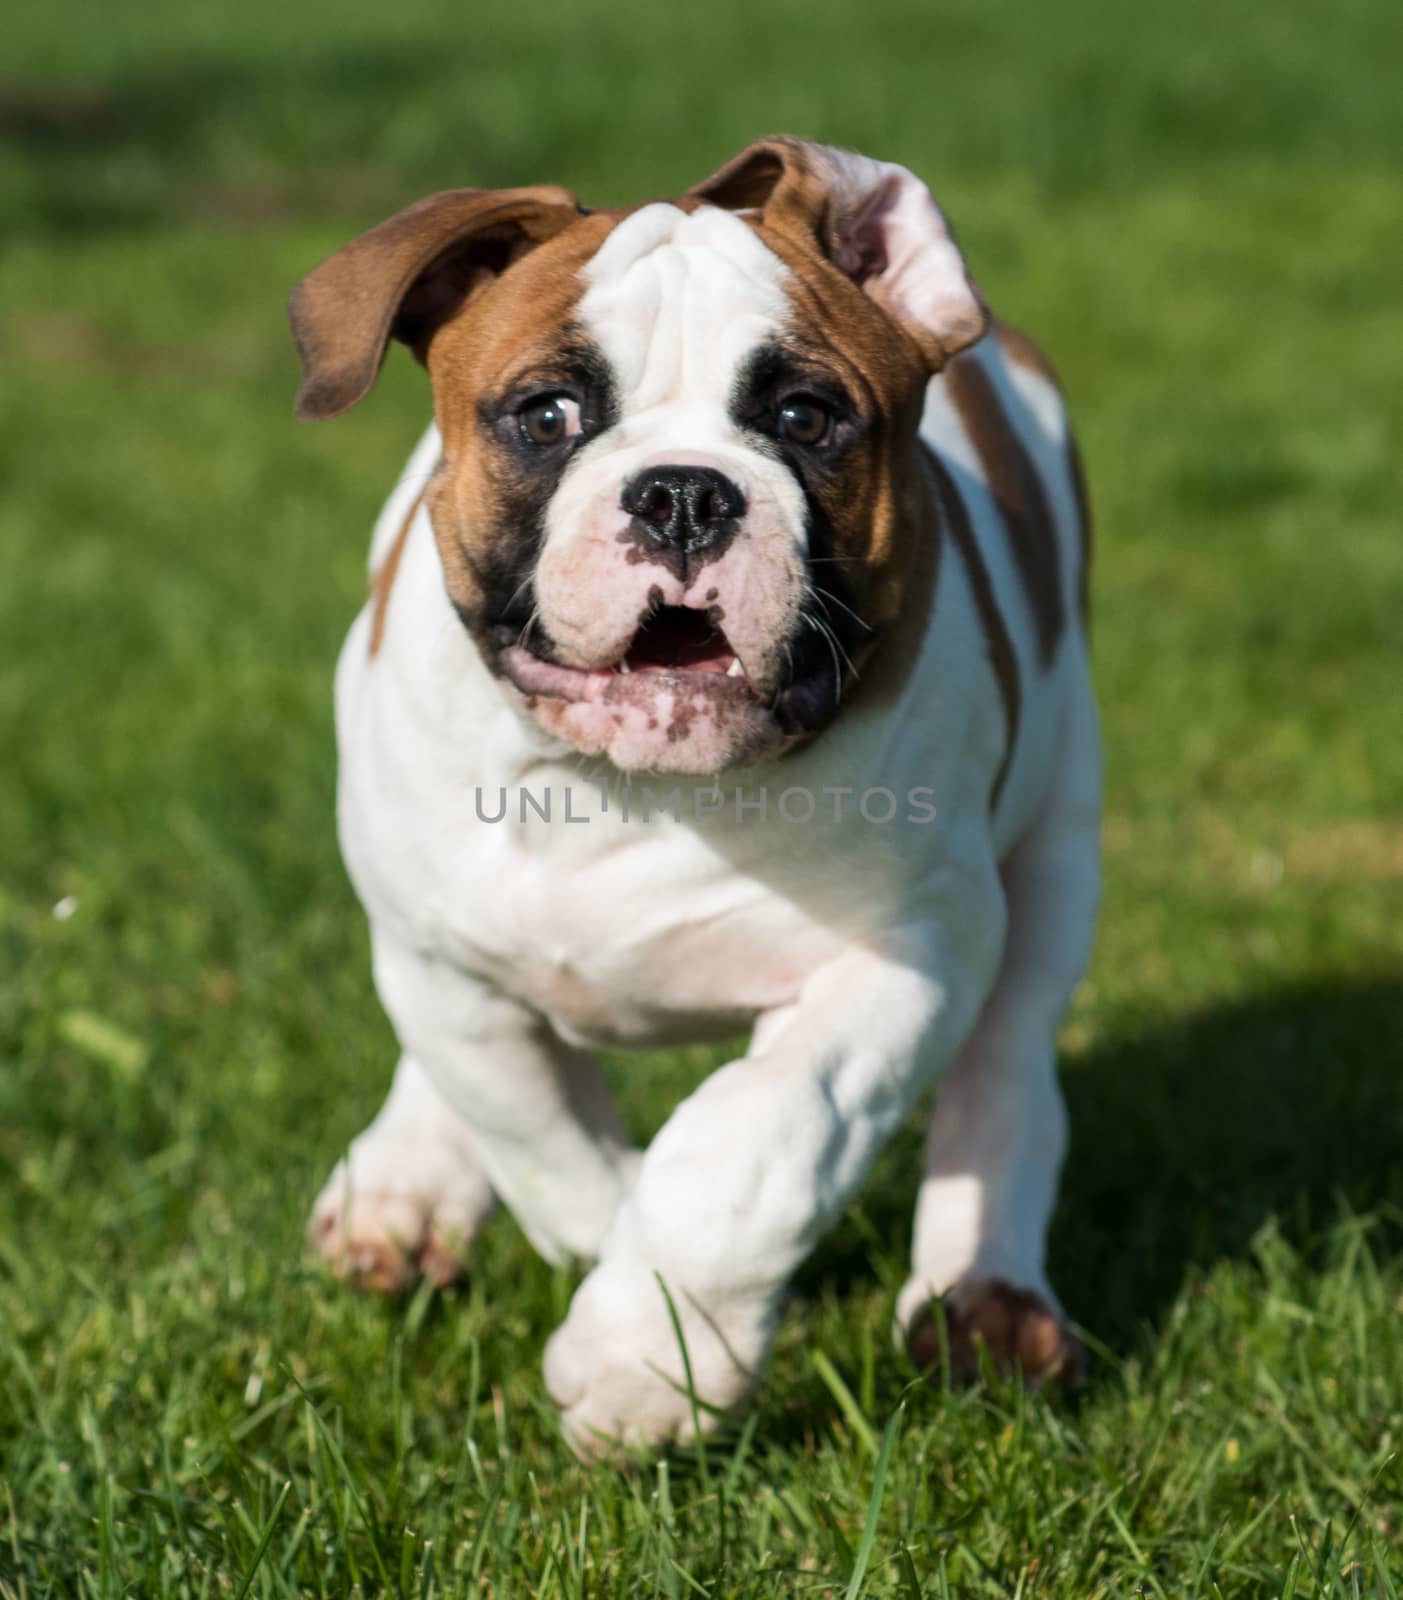 Funny nice red American Bulldog puppy dog in move on nature on green grass.